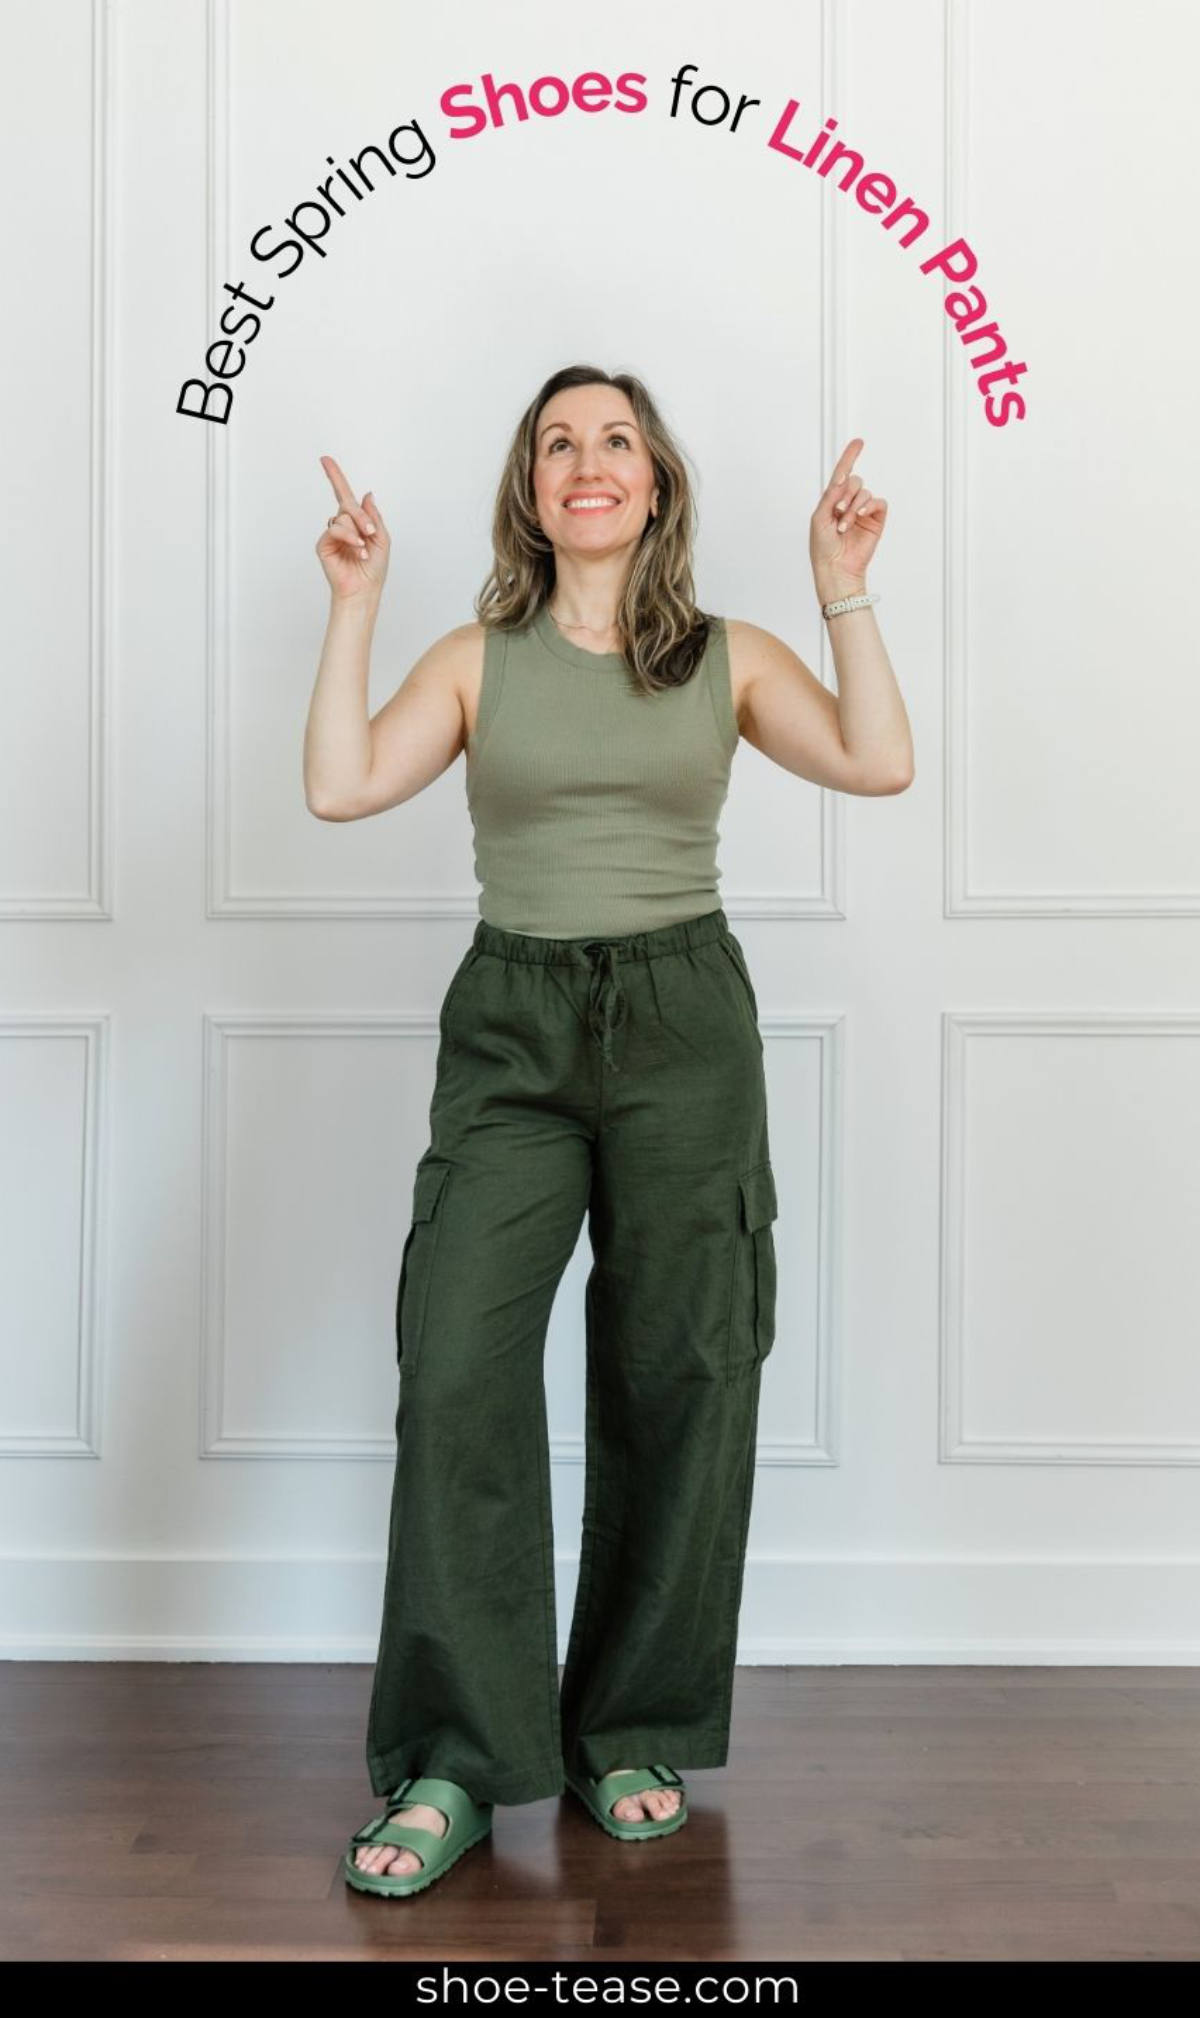 Woman wearing a light green tank top, olive green linen pants and green Birkenstock style sandals, pointing at words reading best spring shoes for linen pants.